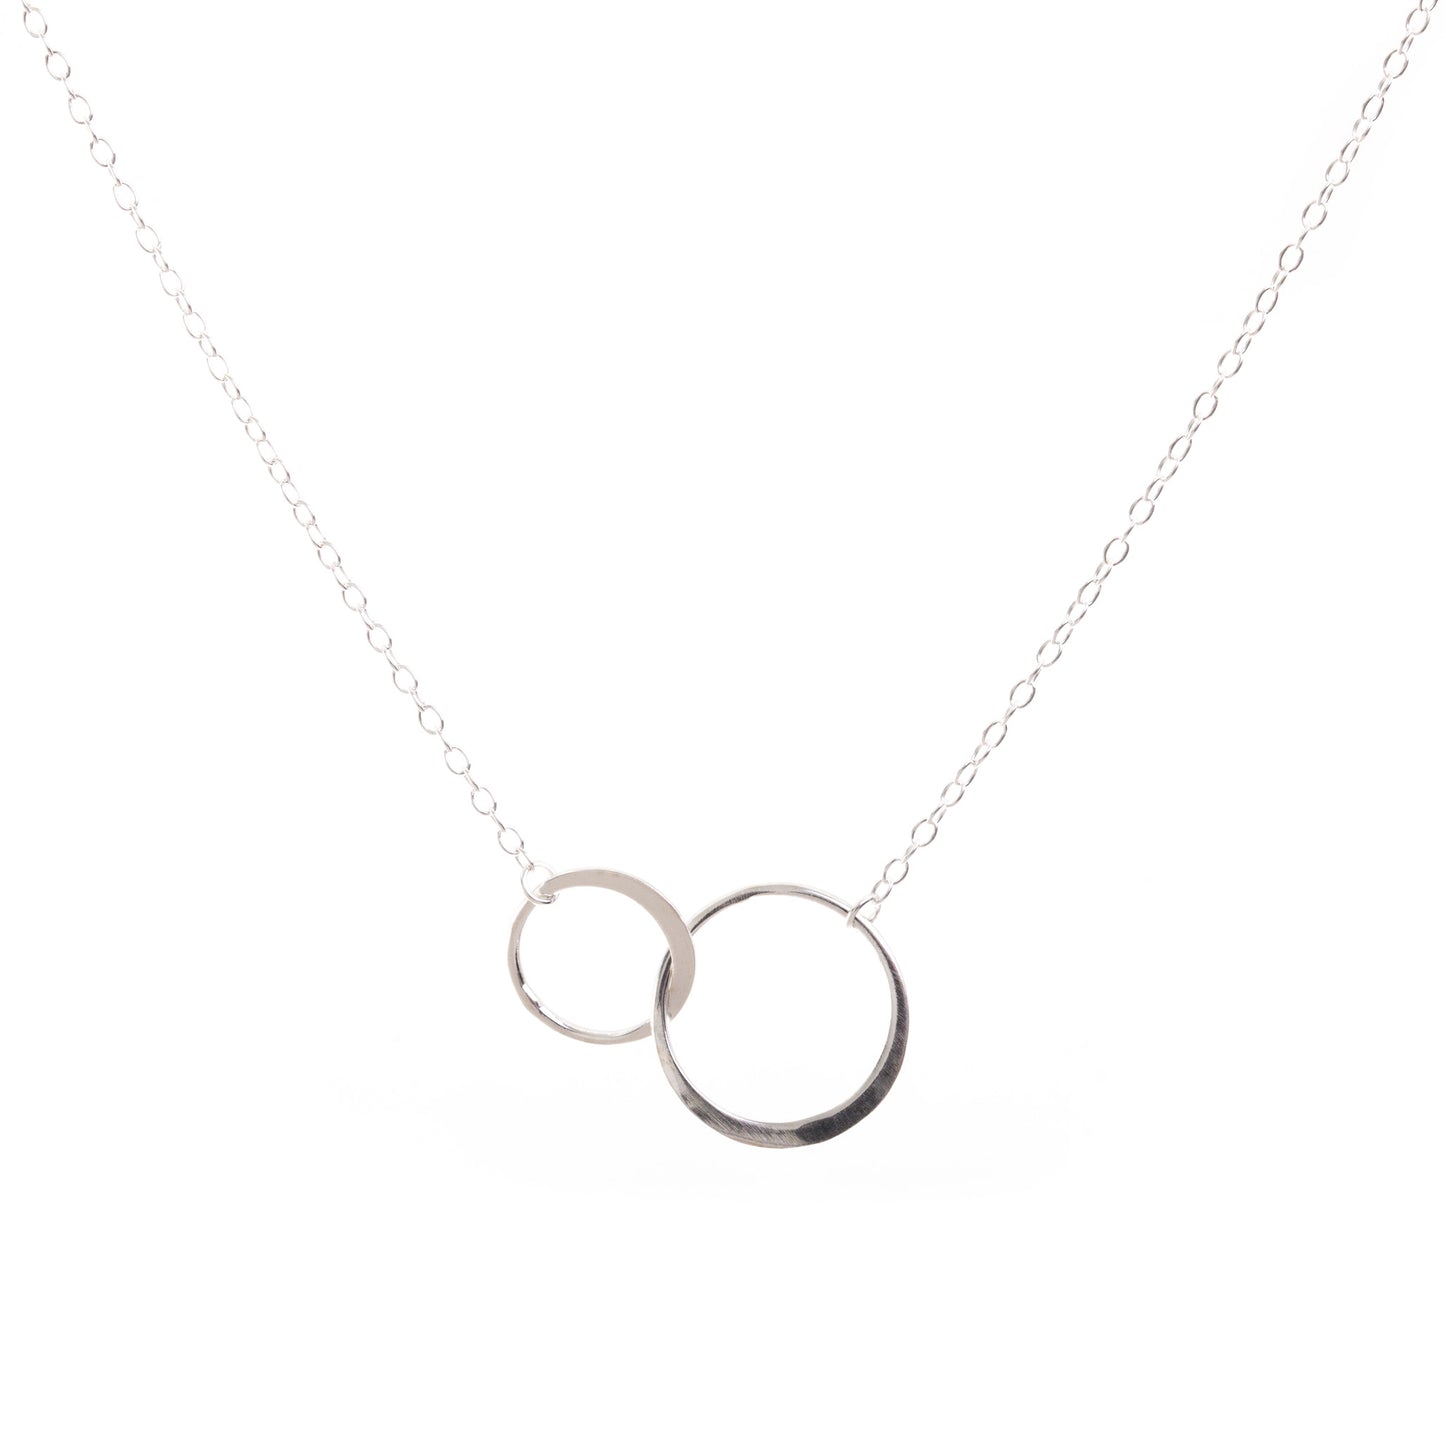 Minimal Silver Flat Linked Necklace